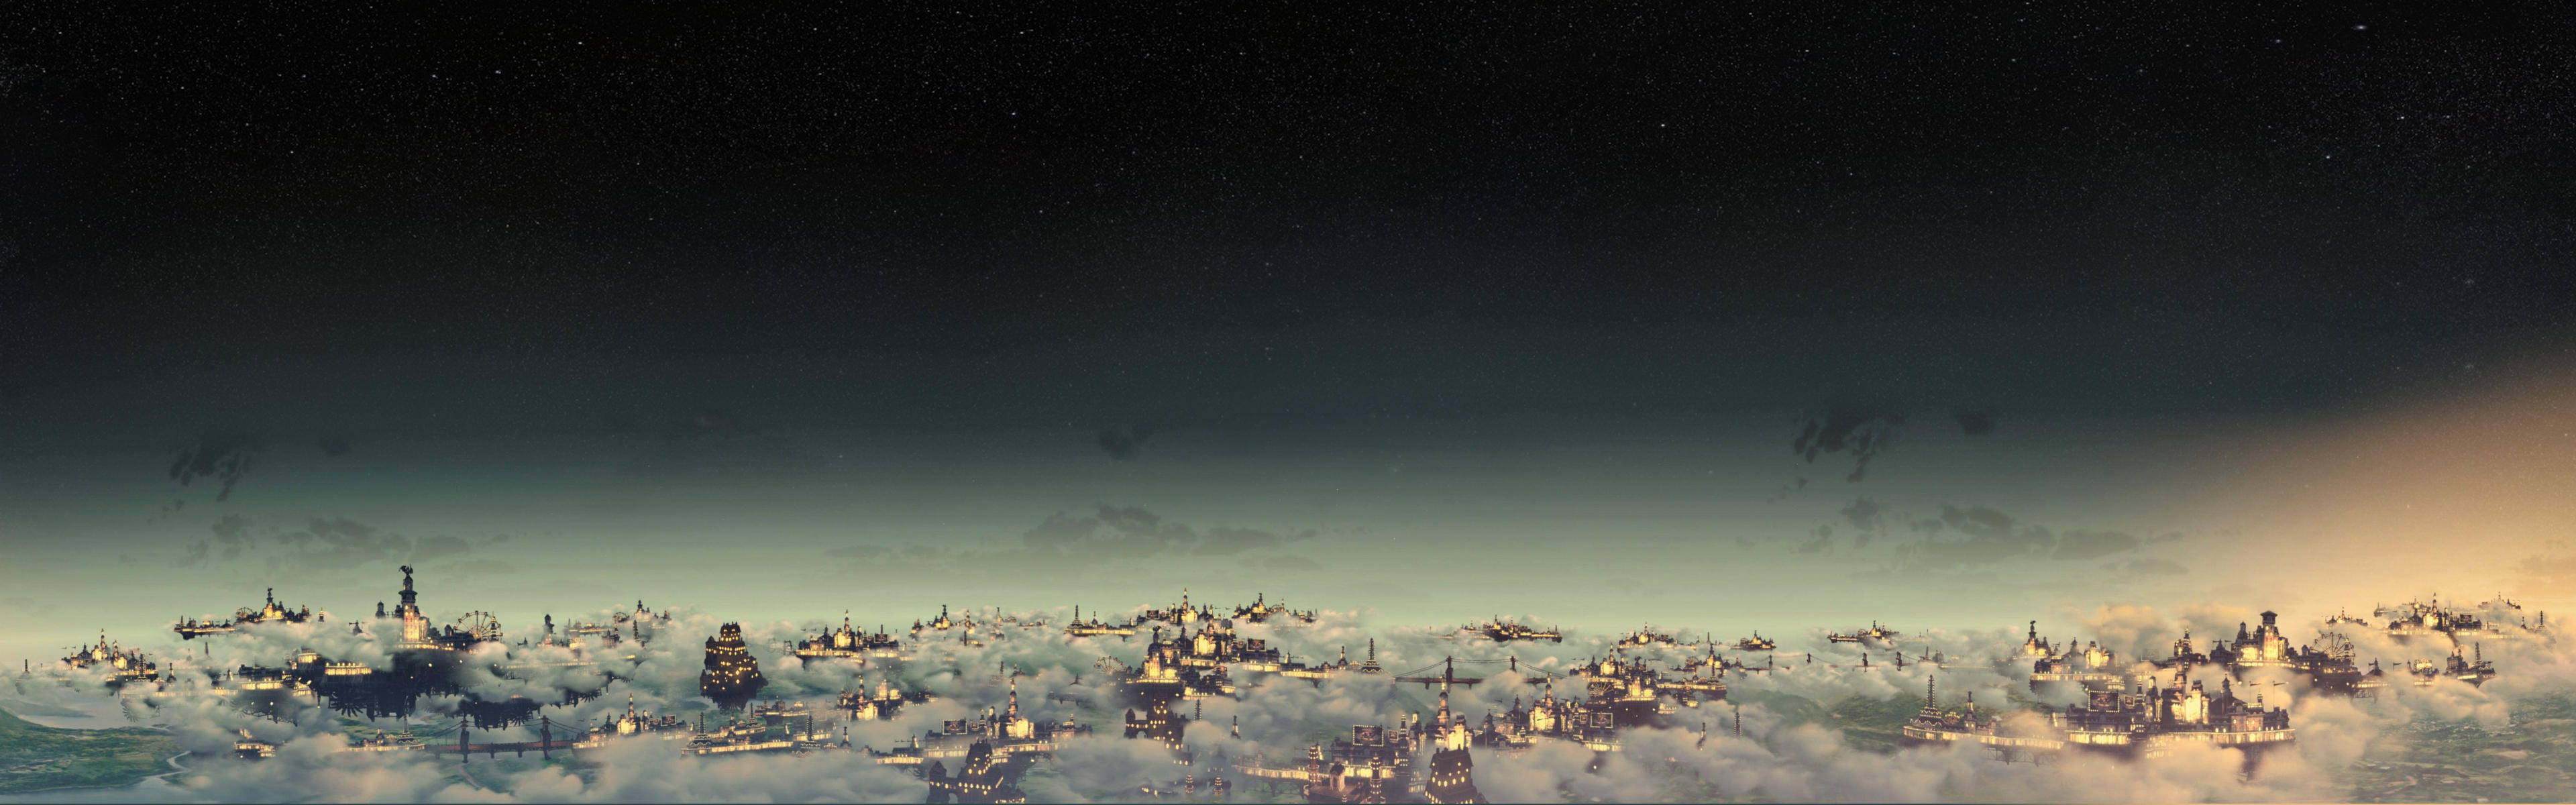 Epic Star Wars City Display - High Resolution Dual Monitor Background